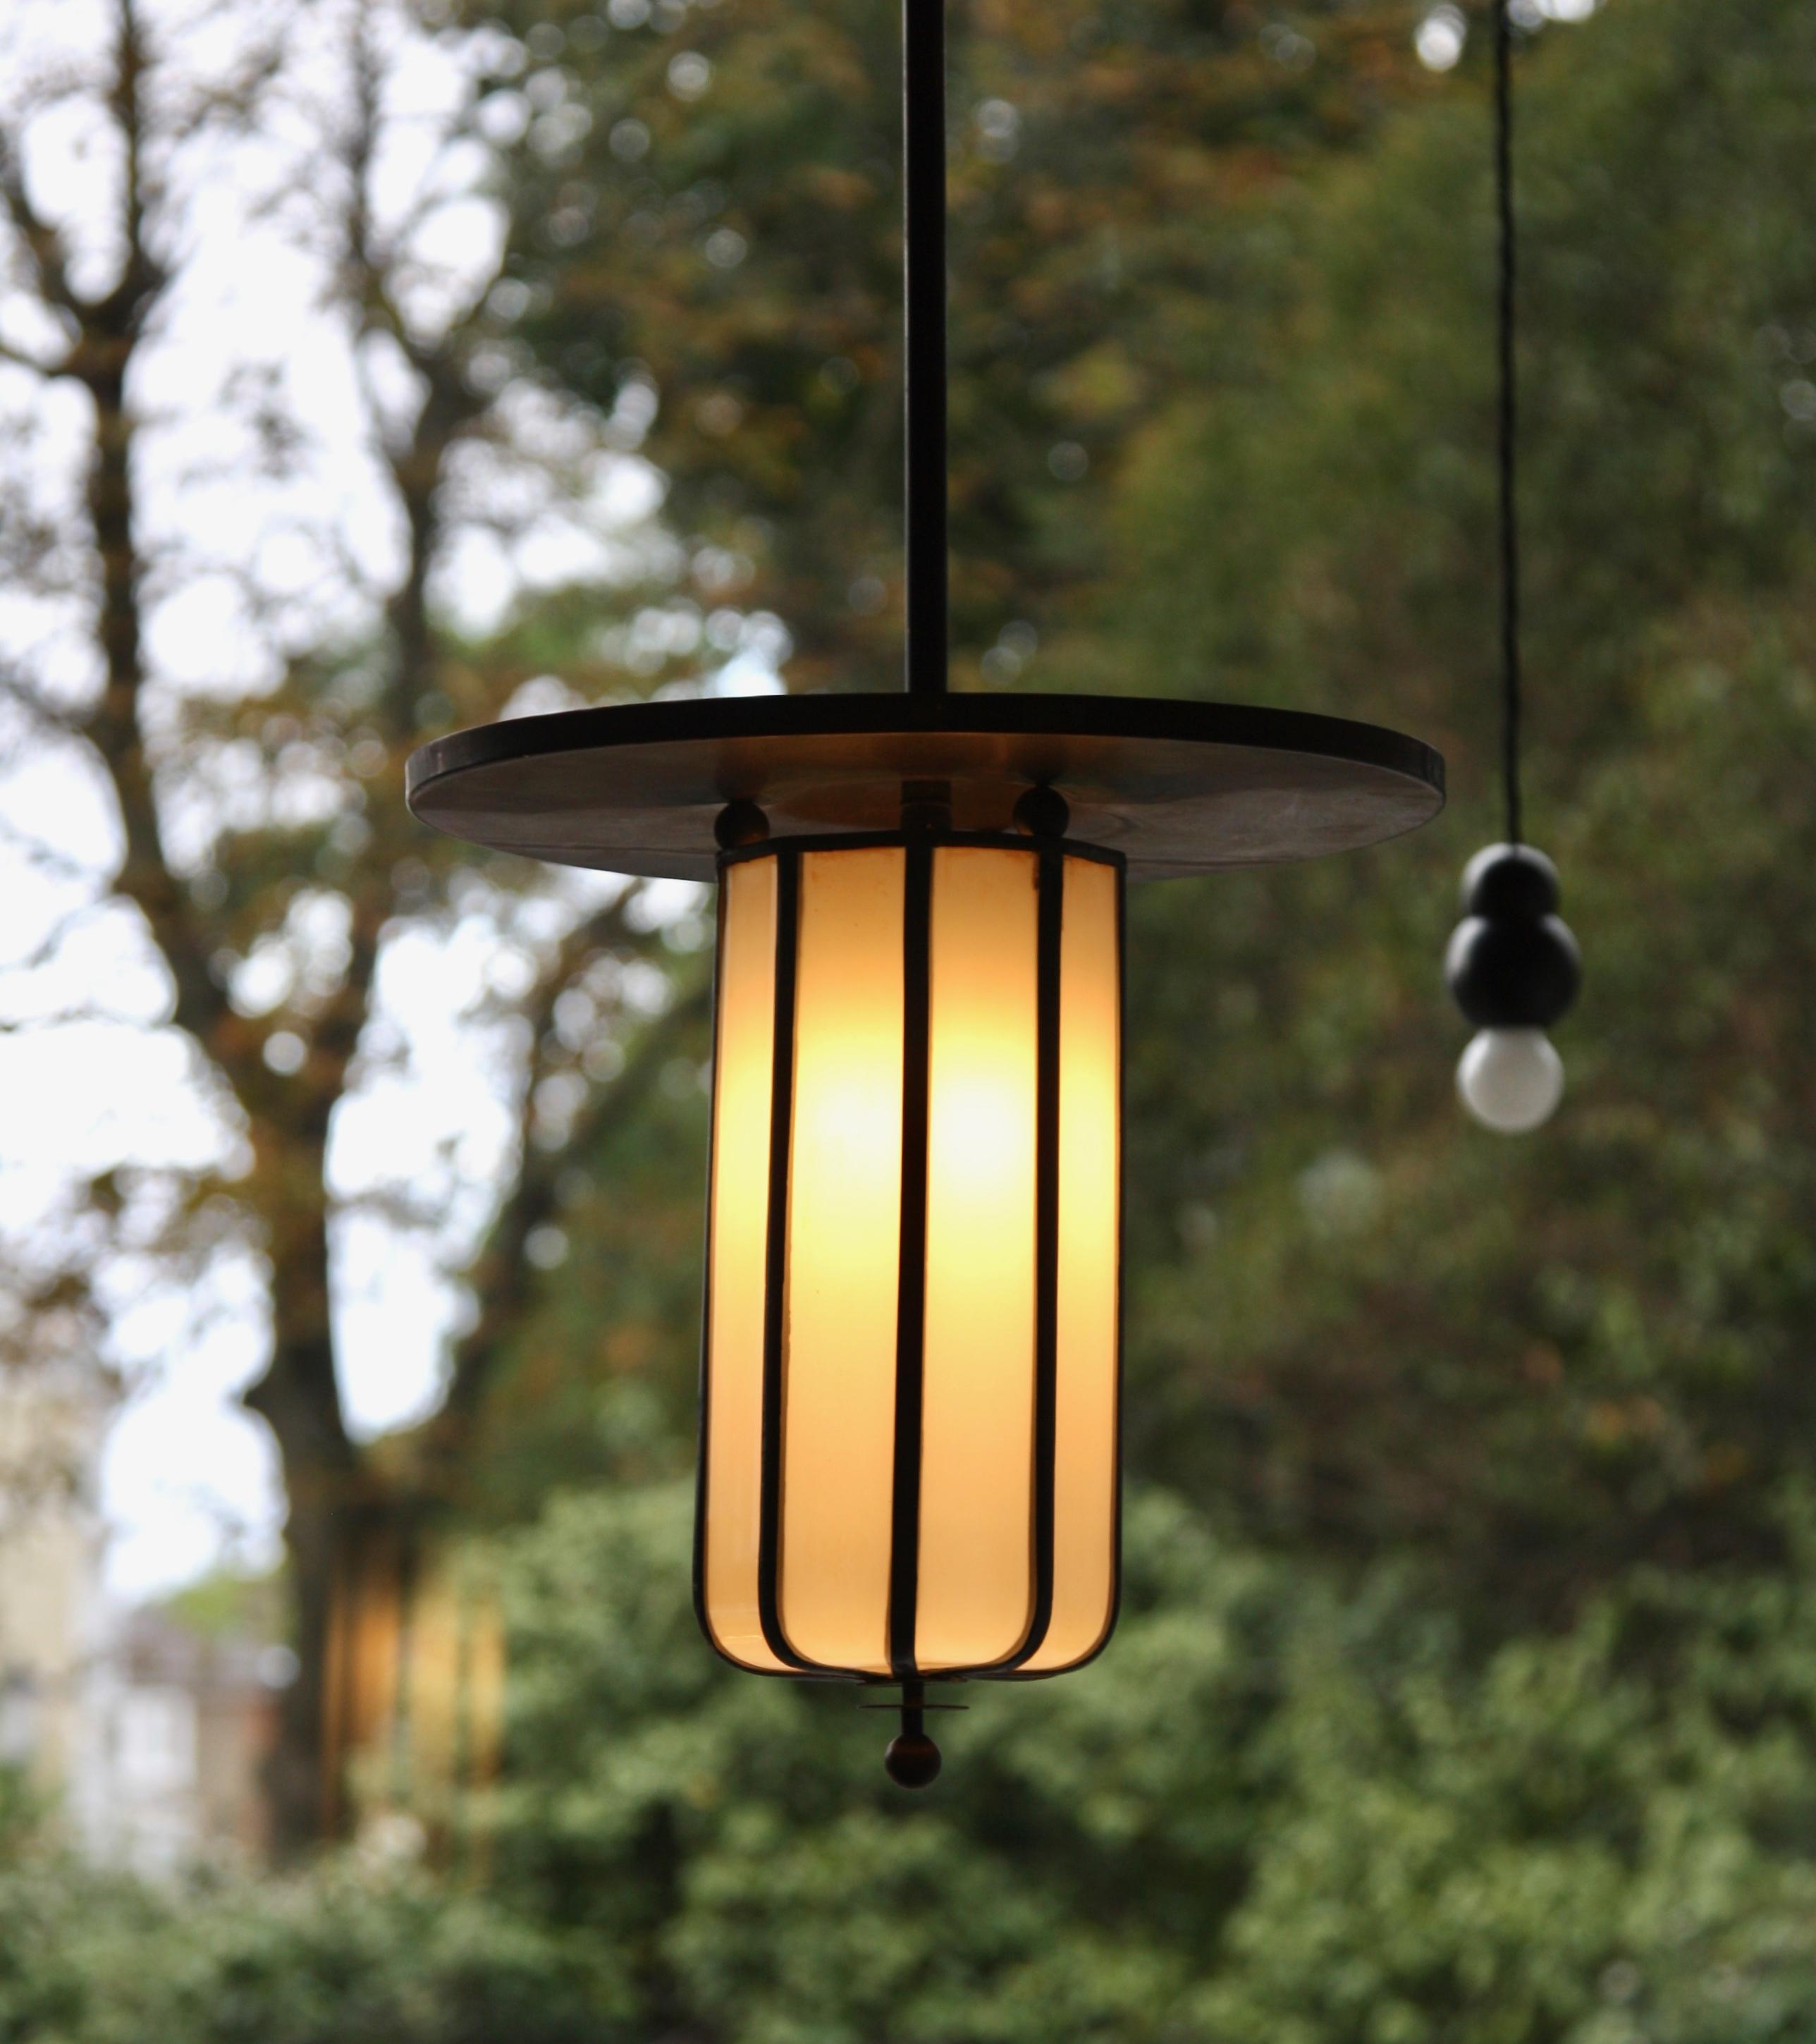 A unique metal and glass pendant light designed and made in the Netherlands, circa 1925.
The lamp was bespoke made for an entrance hallway in Amsterdam hence the elongated proportions of the design.
Furniture that is fitted within an interior